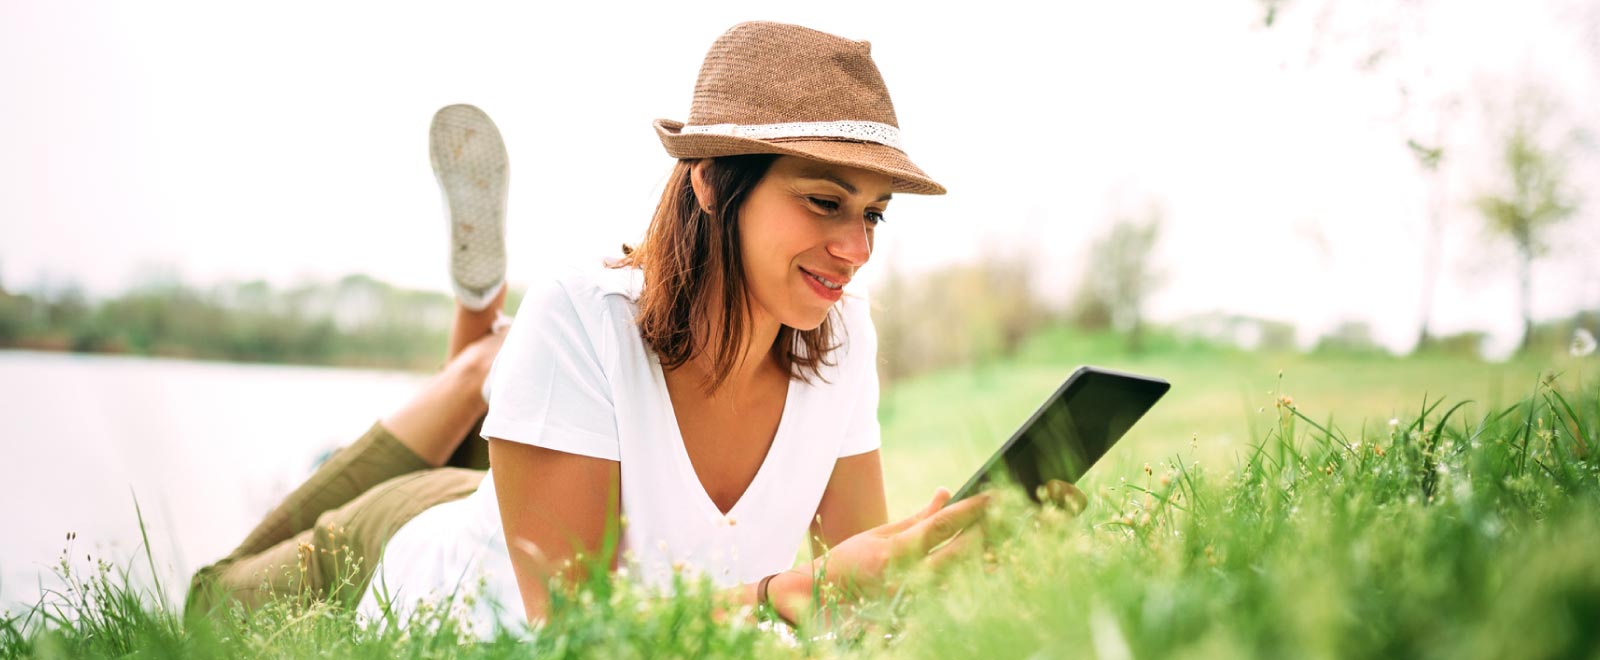 A woman relaxes outdoors while shopping online, enjoying the benefits of her Visa Platinum Rewards Credit Card.